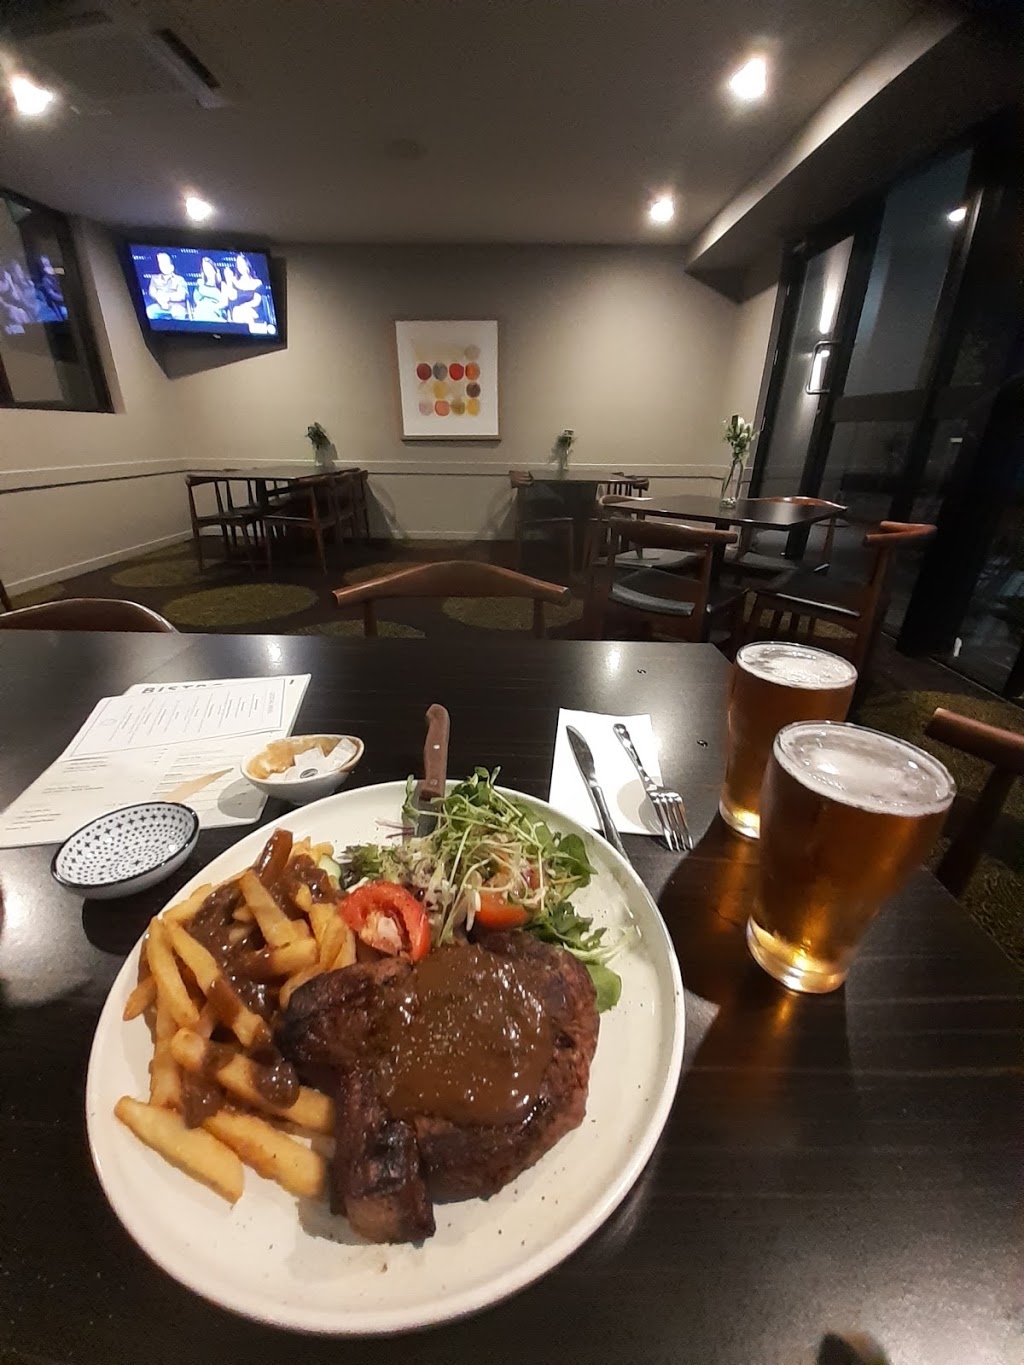 The Wattle Hotel | cafe | 1 Reserve Rd, Upper Coomera QLD 4209, Australia | 0755000700 OR +61 7 5500 0700